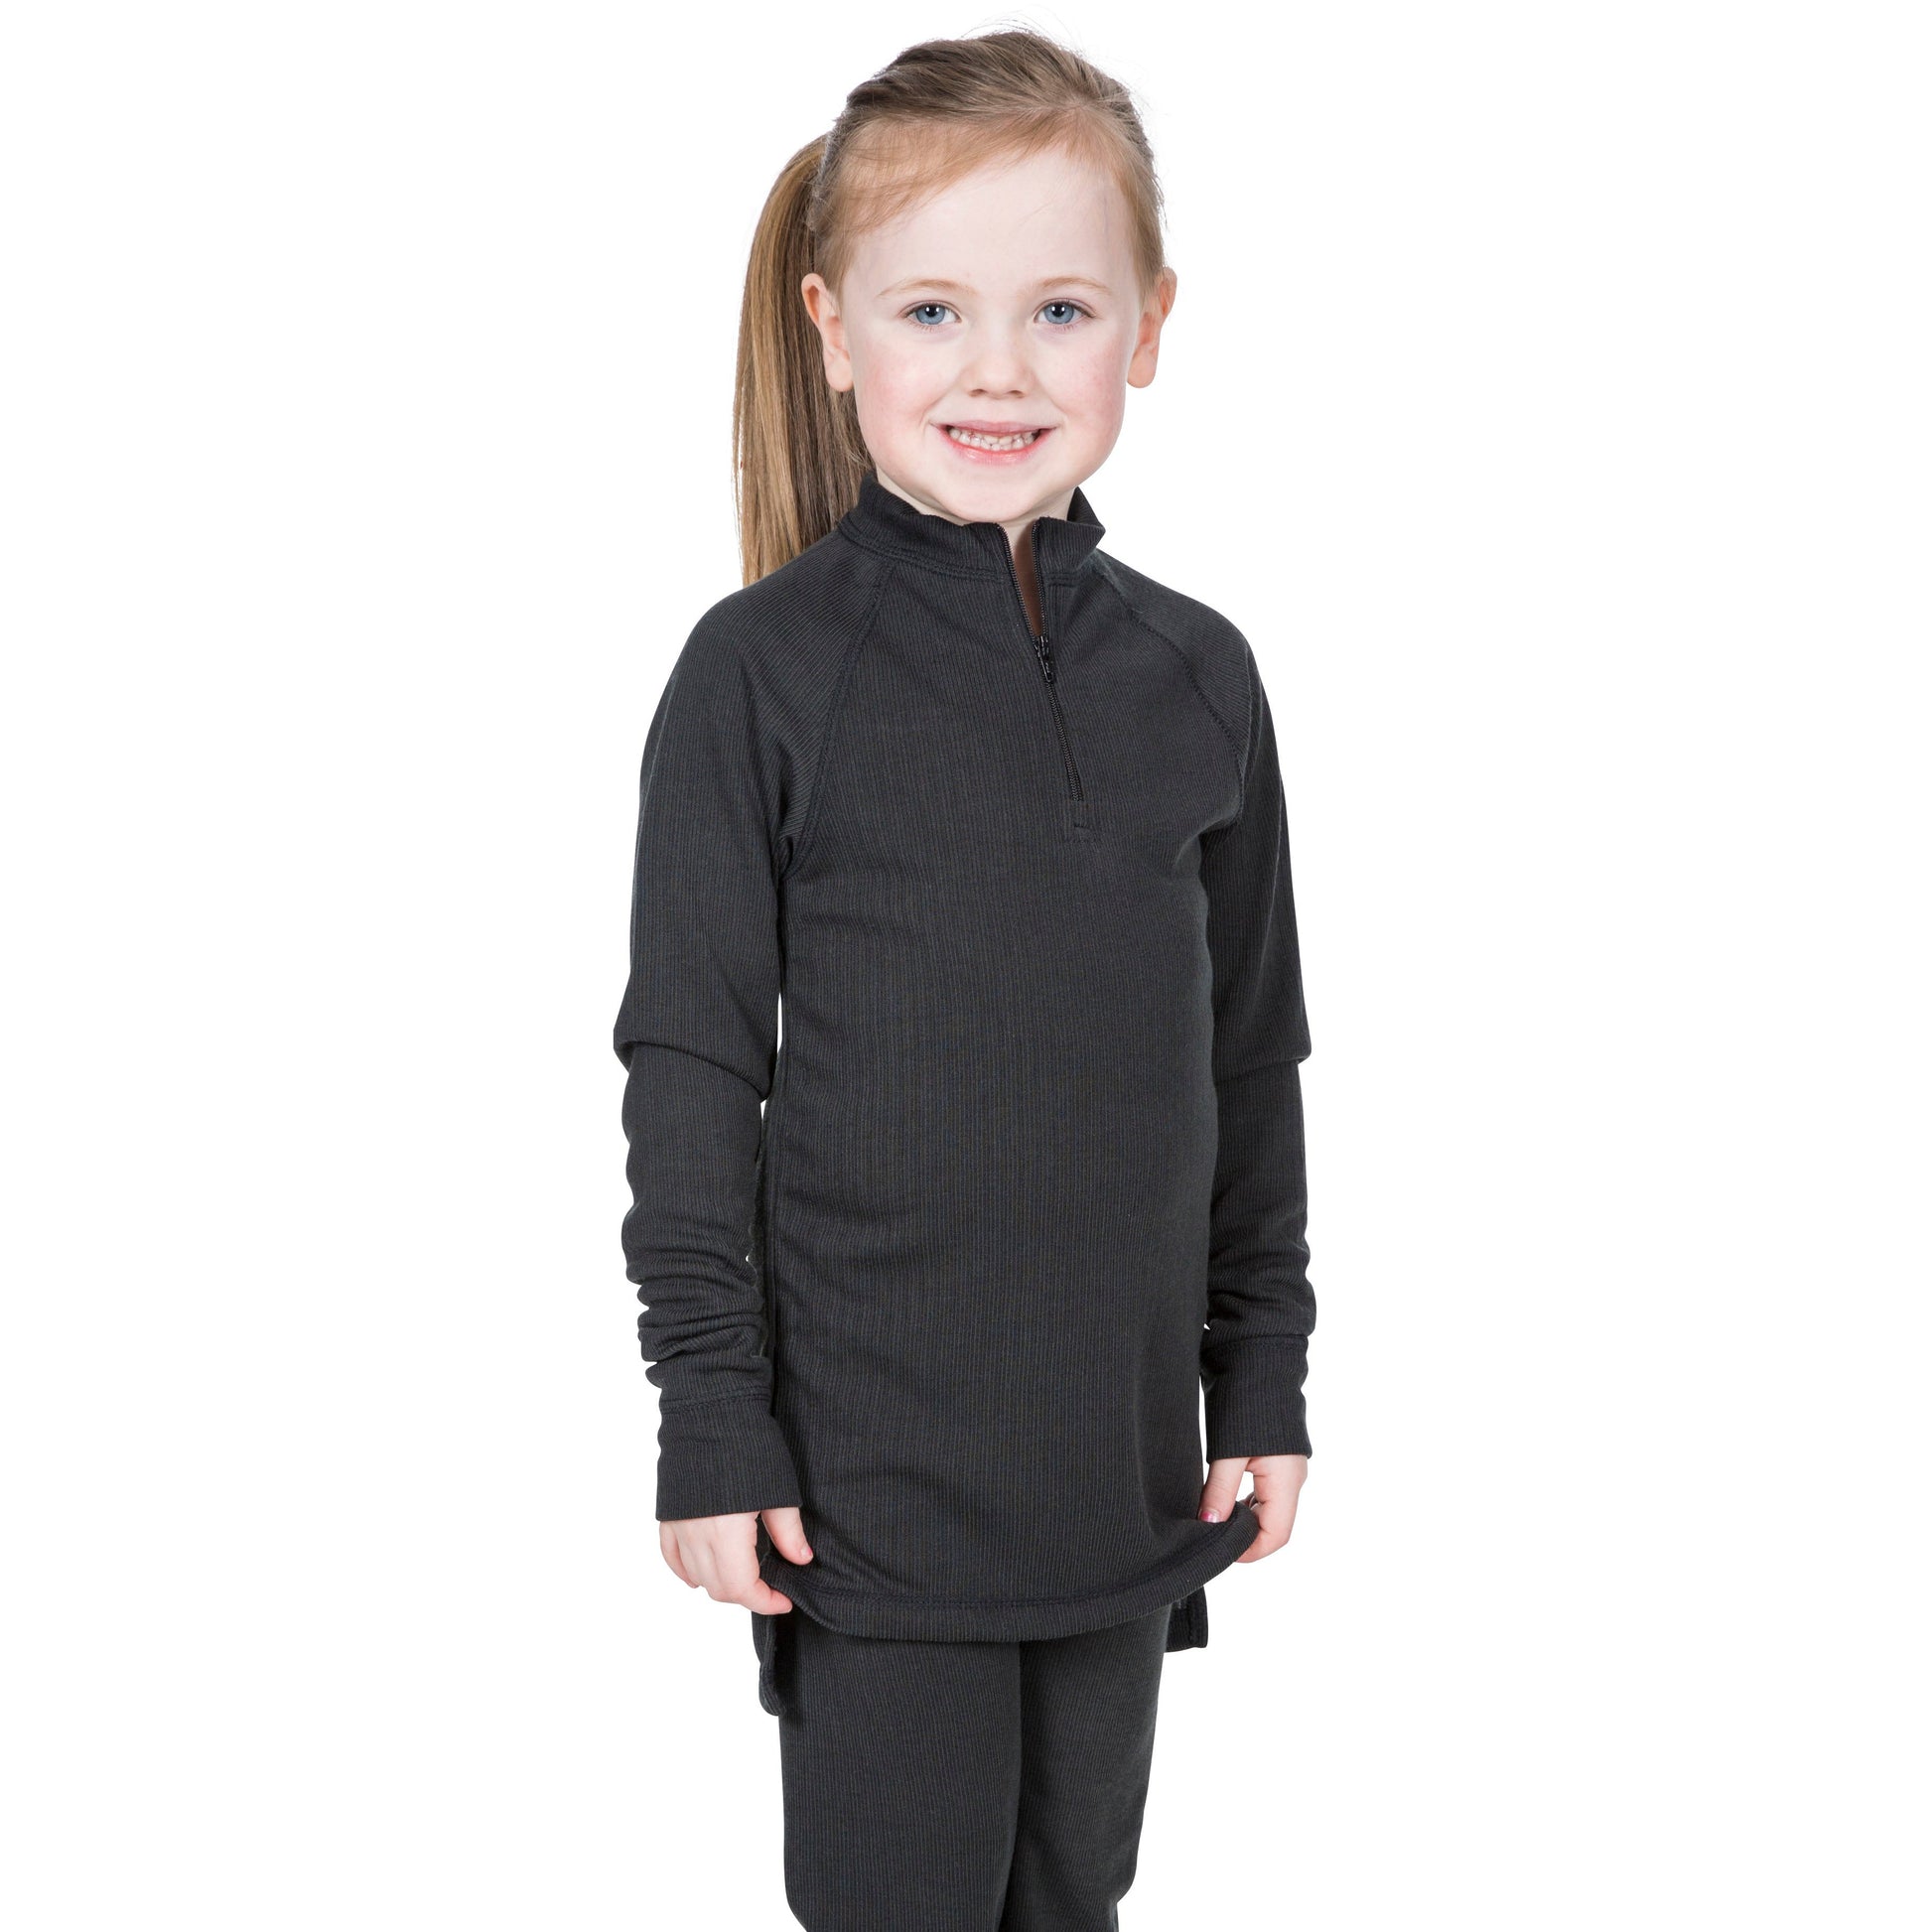 Kids Outdoor Base Layers & Thermals